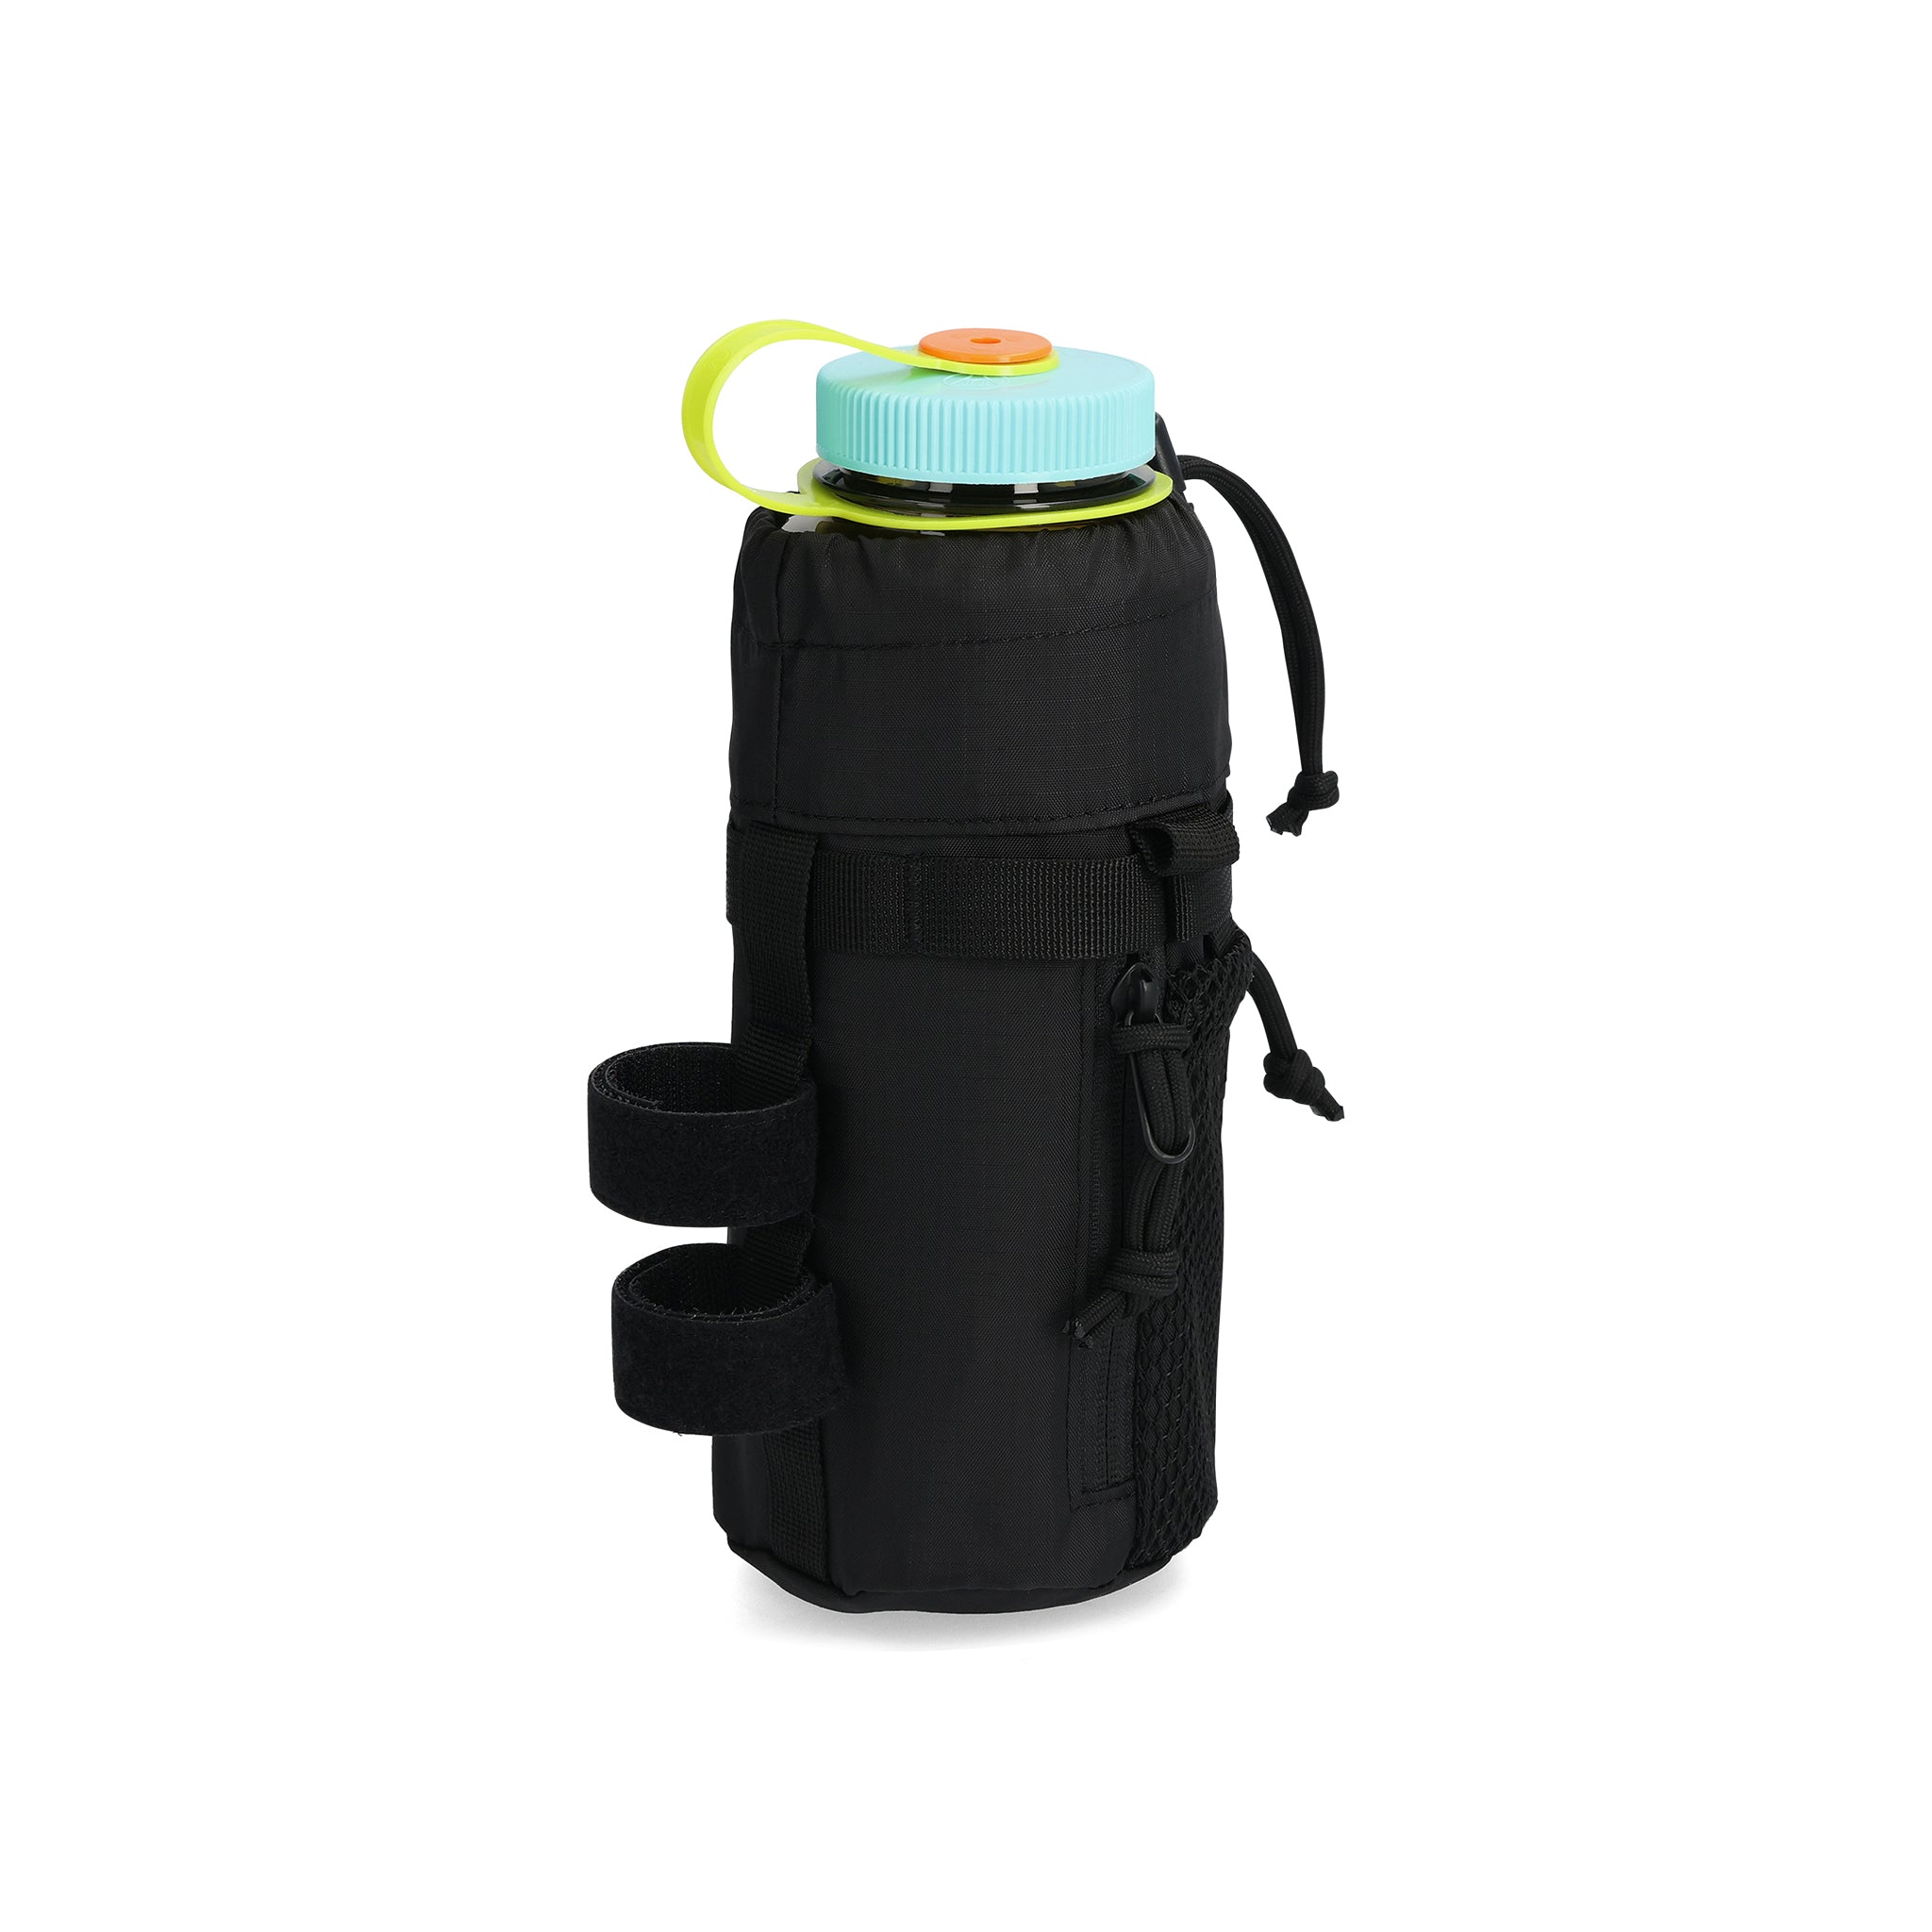 Back View of Topo Designs Mountain Hydro Sling in "Black"